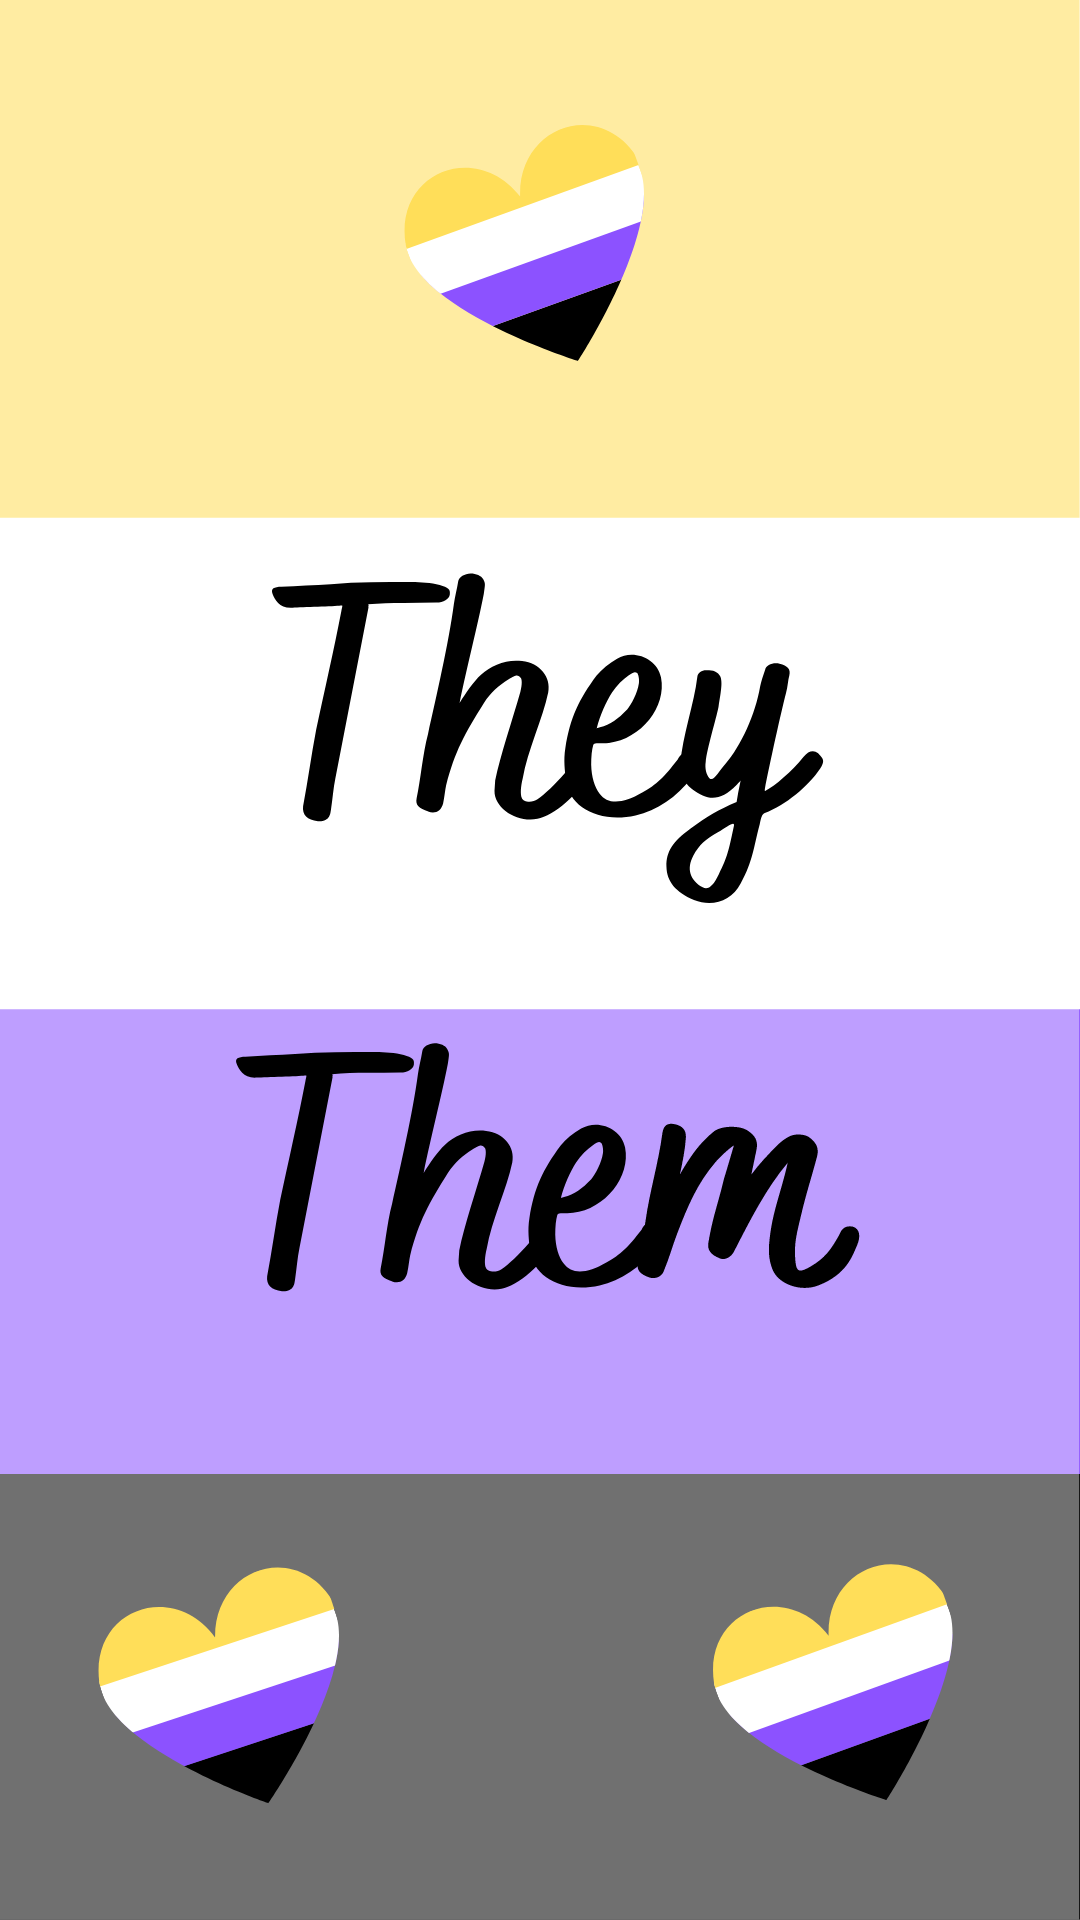 Cute Phone Wallpaper I've Made For Friends And Self. Pansexual, Transgender, Genderfluid And Non Binary. Help Yourselves. Xo